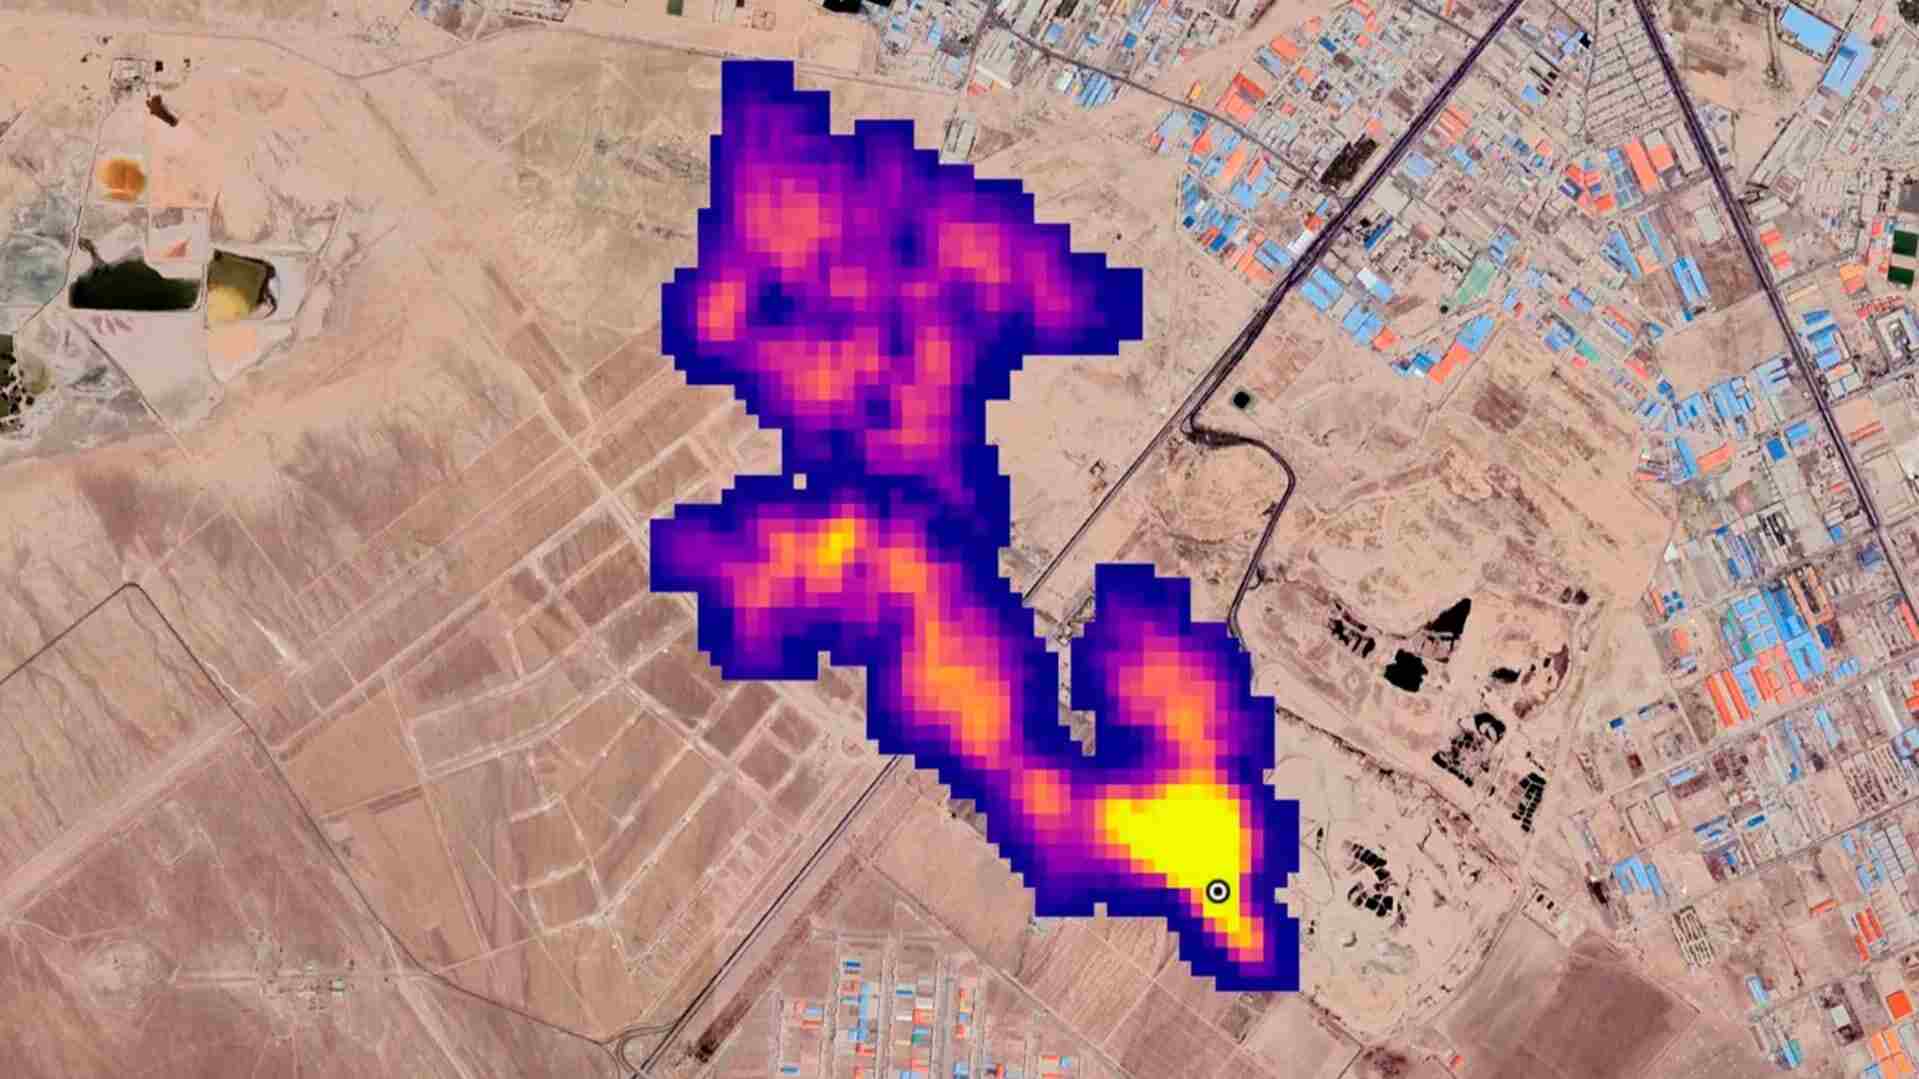 Far more climate-warming methane leaks into the atmosphere than is reported. Satellites can help